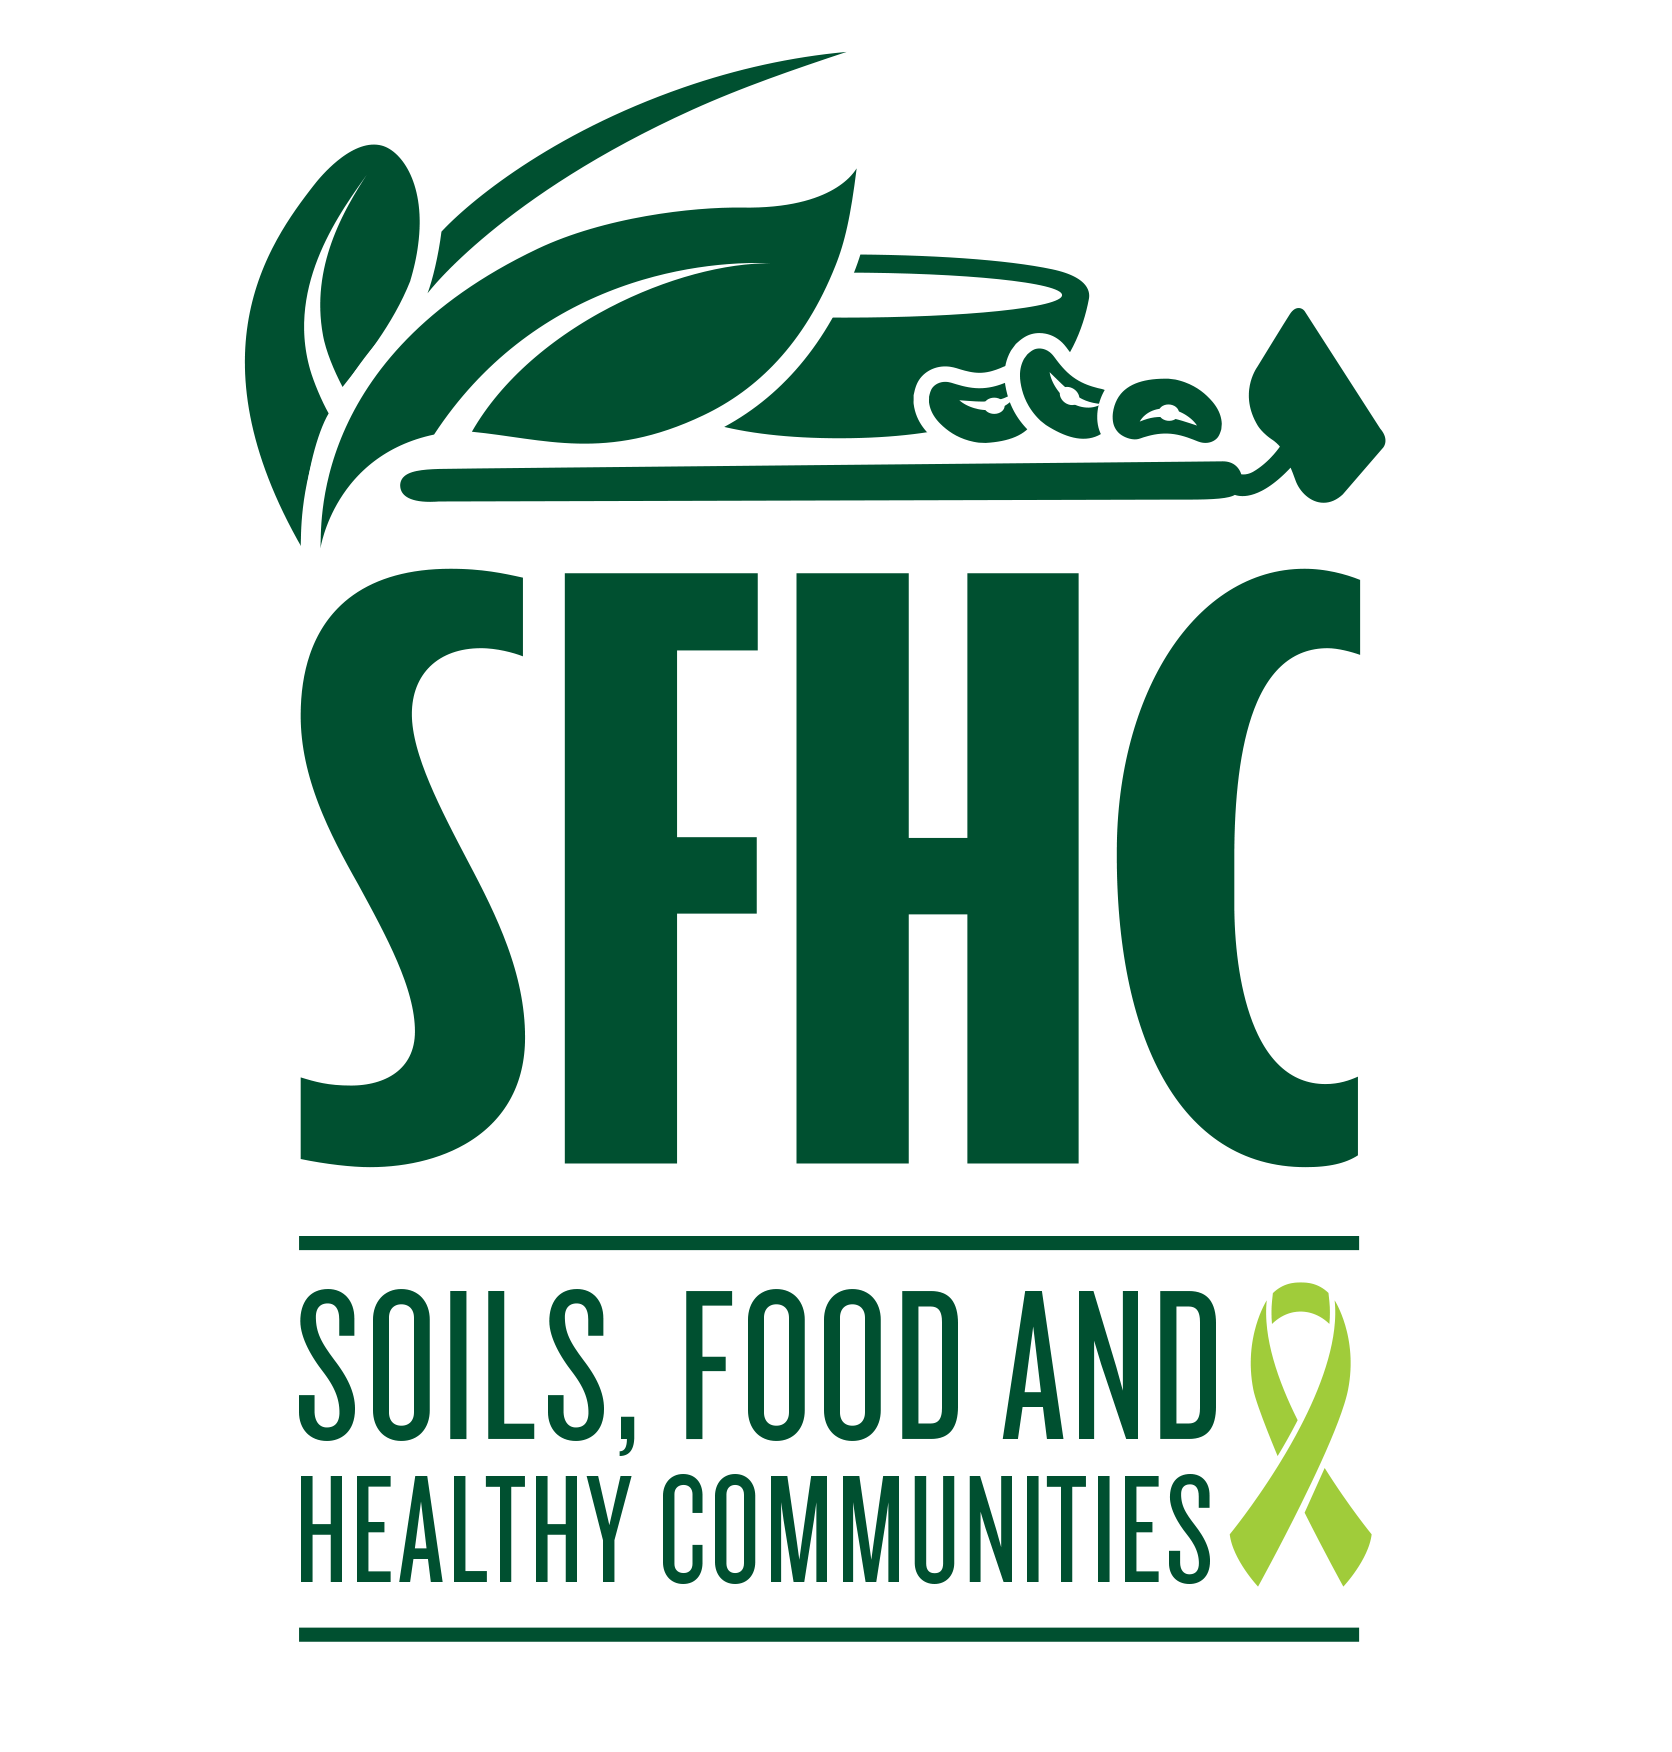 Soils, Food and Healthy Communities